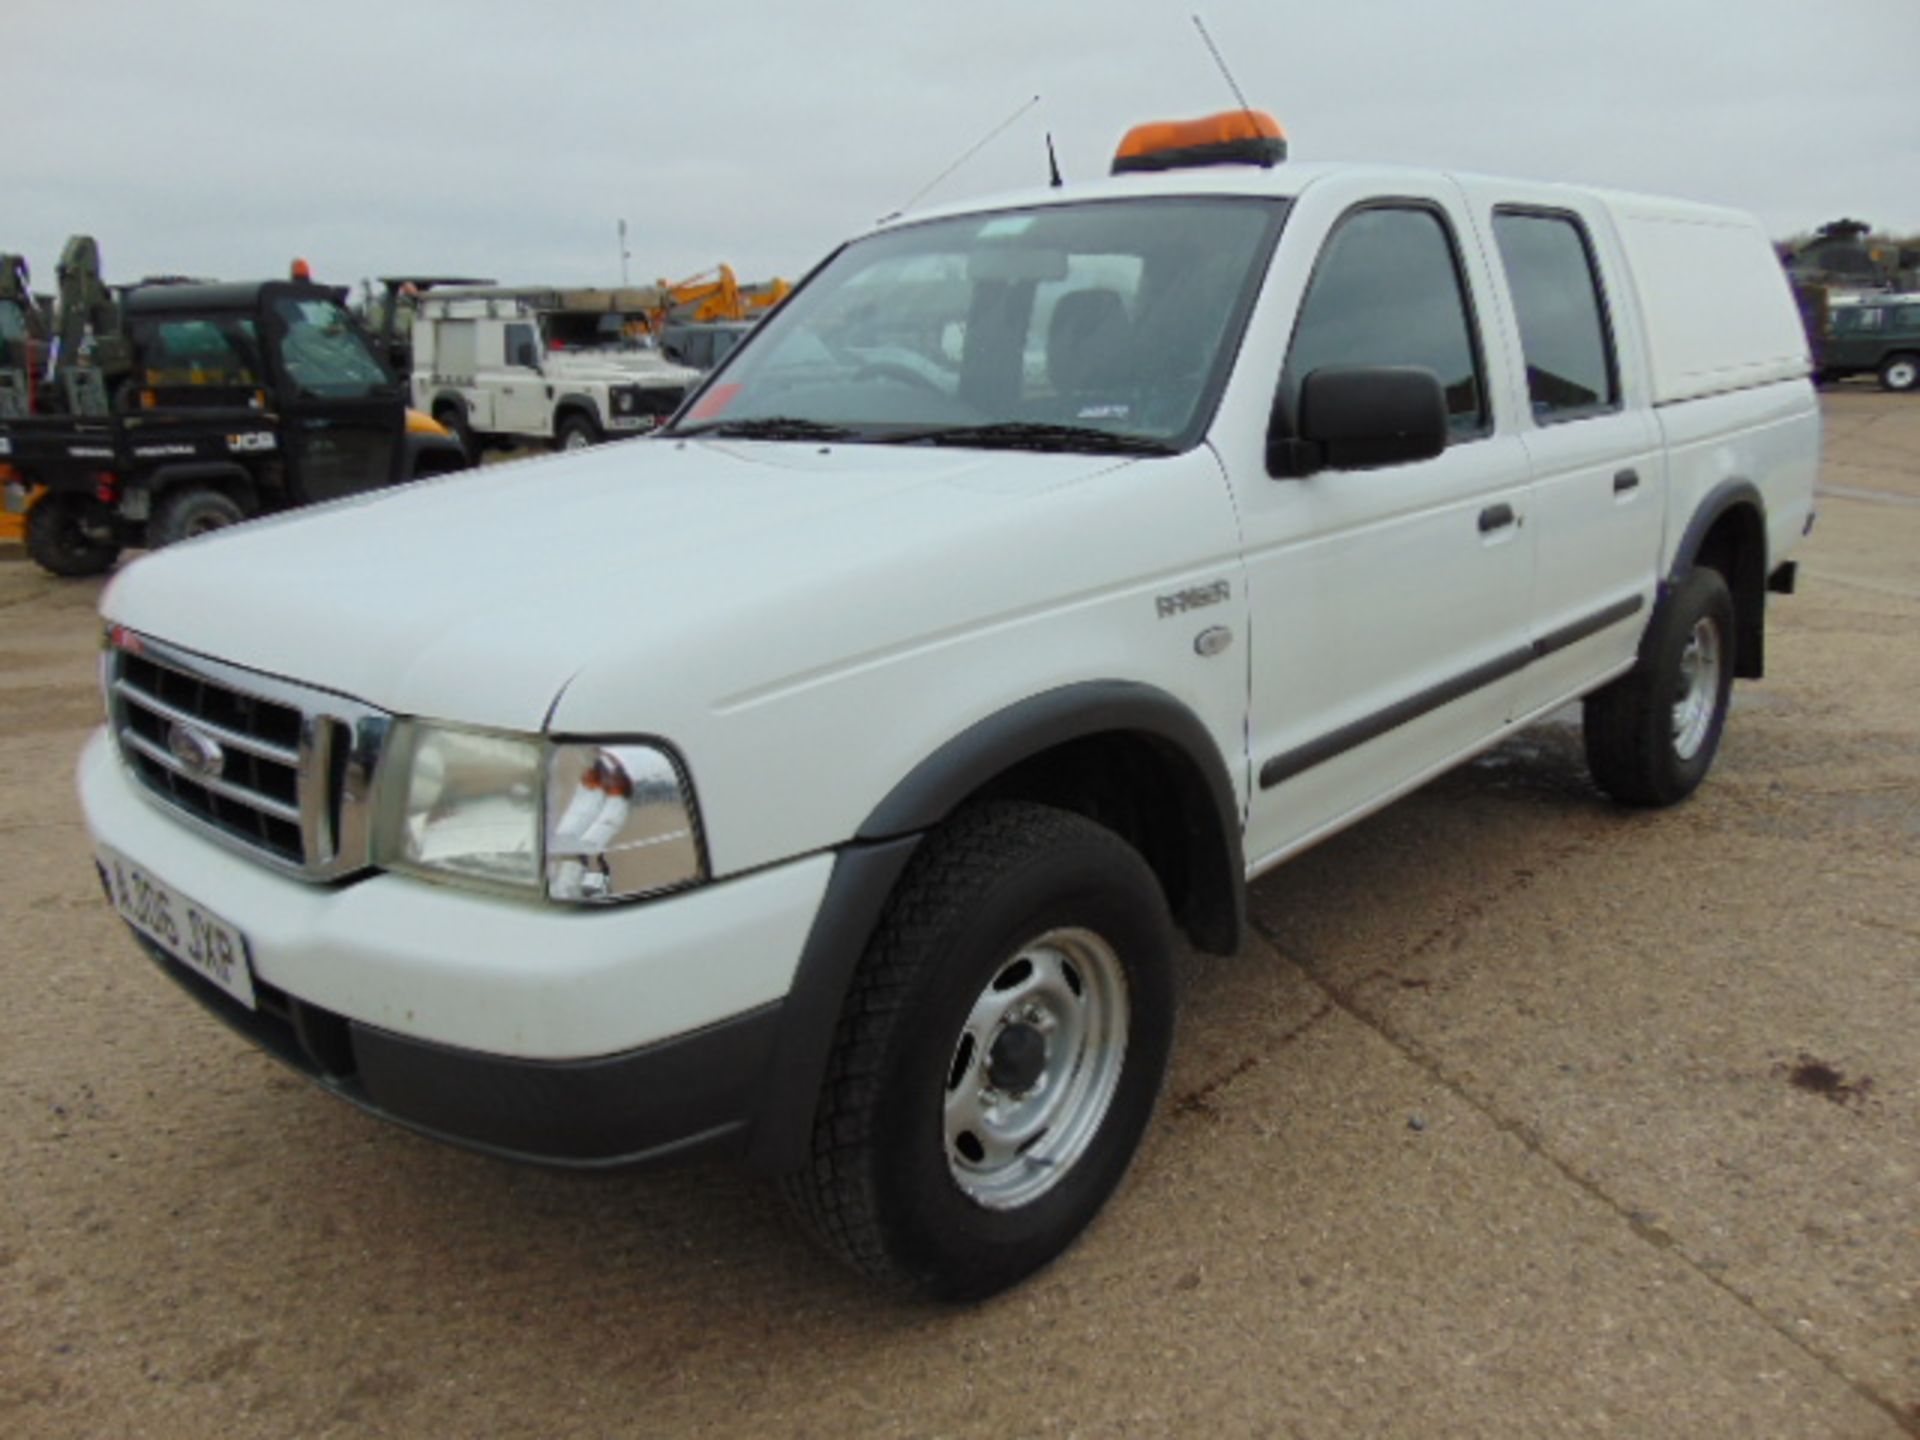 2006 Ford Ranger Double cab pickup - Image 3 of 14